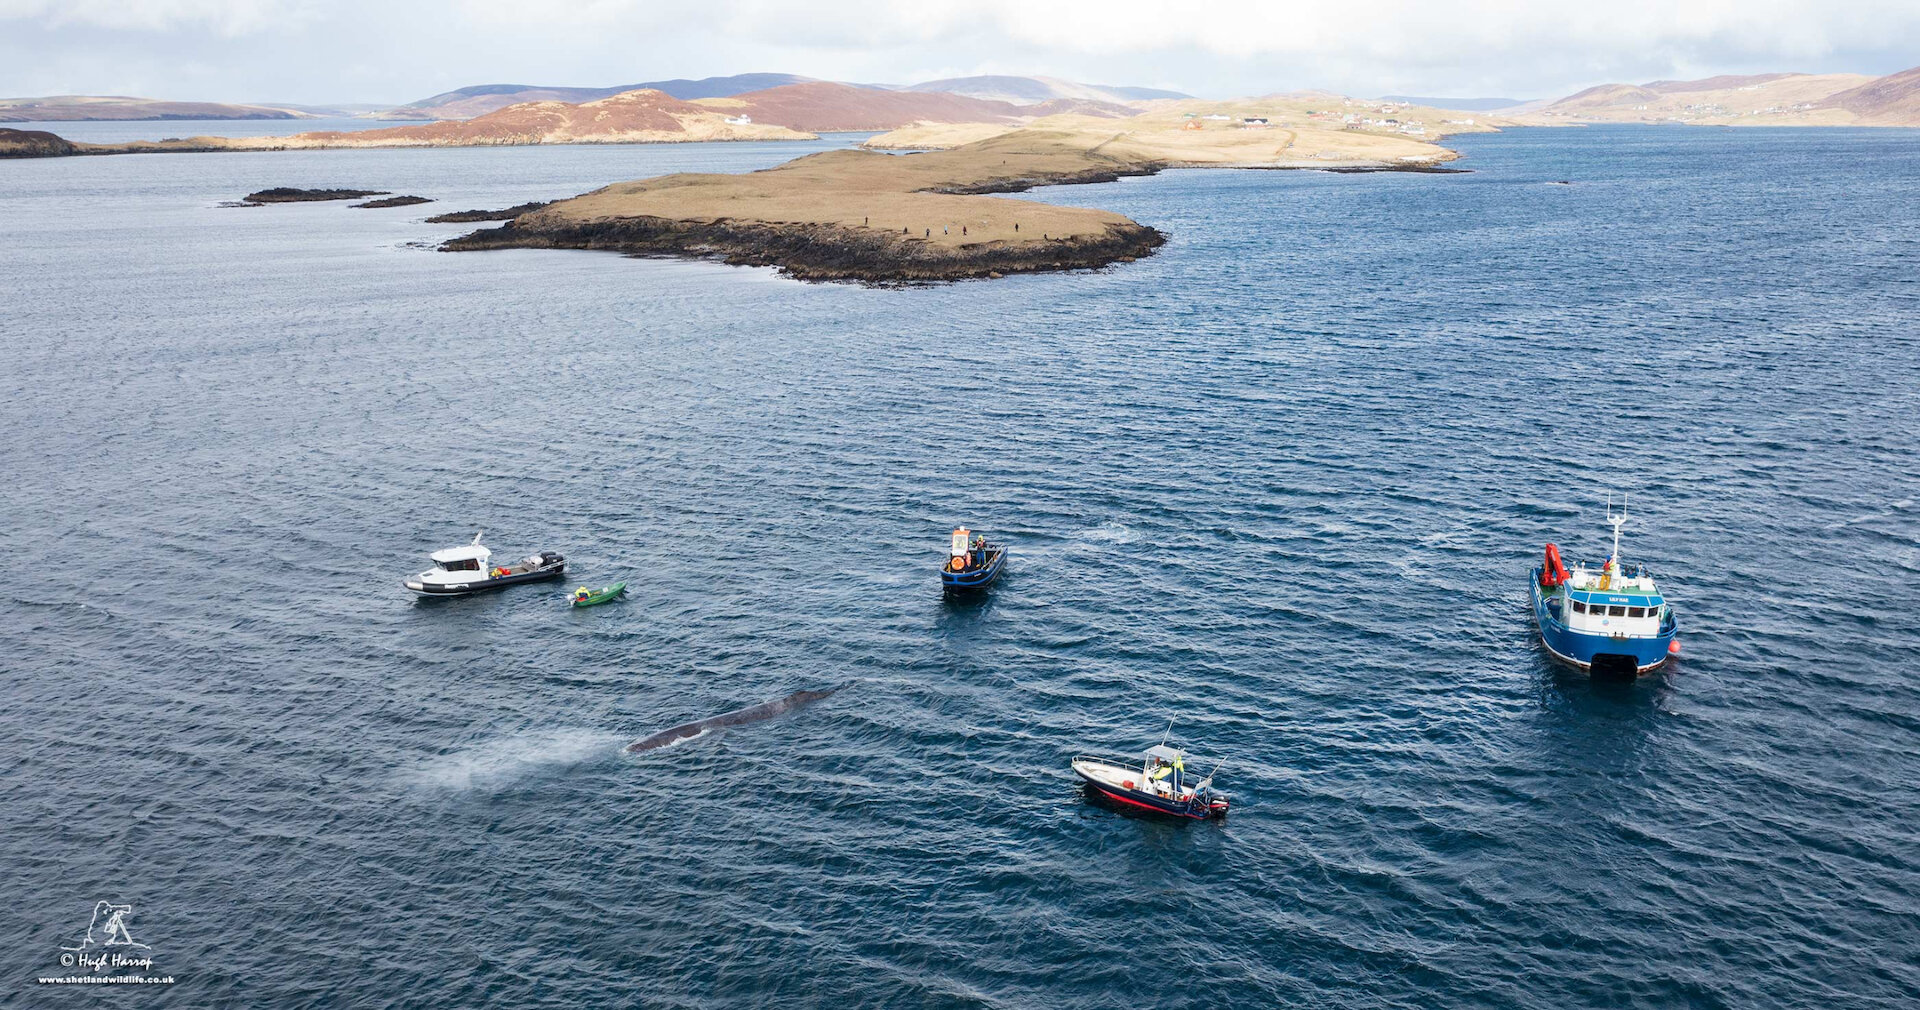 The collection of boats belonging to residents and the salmon farming company Scottish Sea Farms, guide the sperm whale to deeper waters.